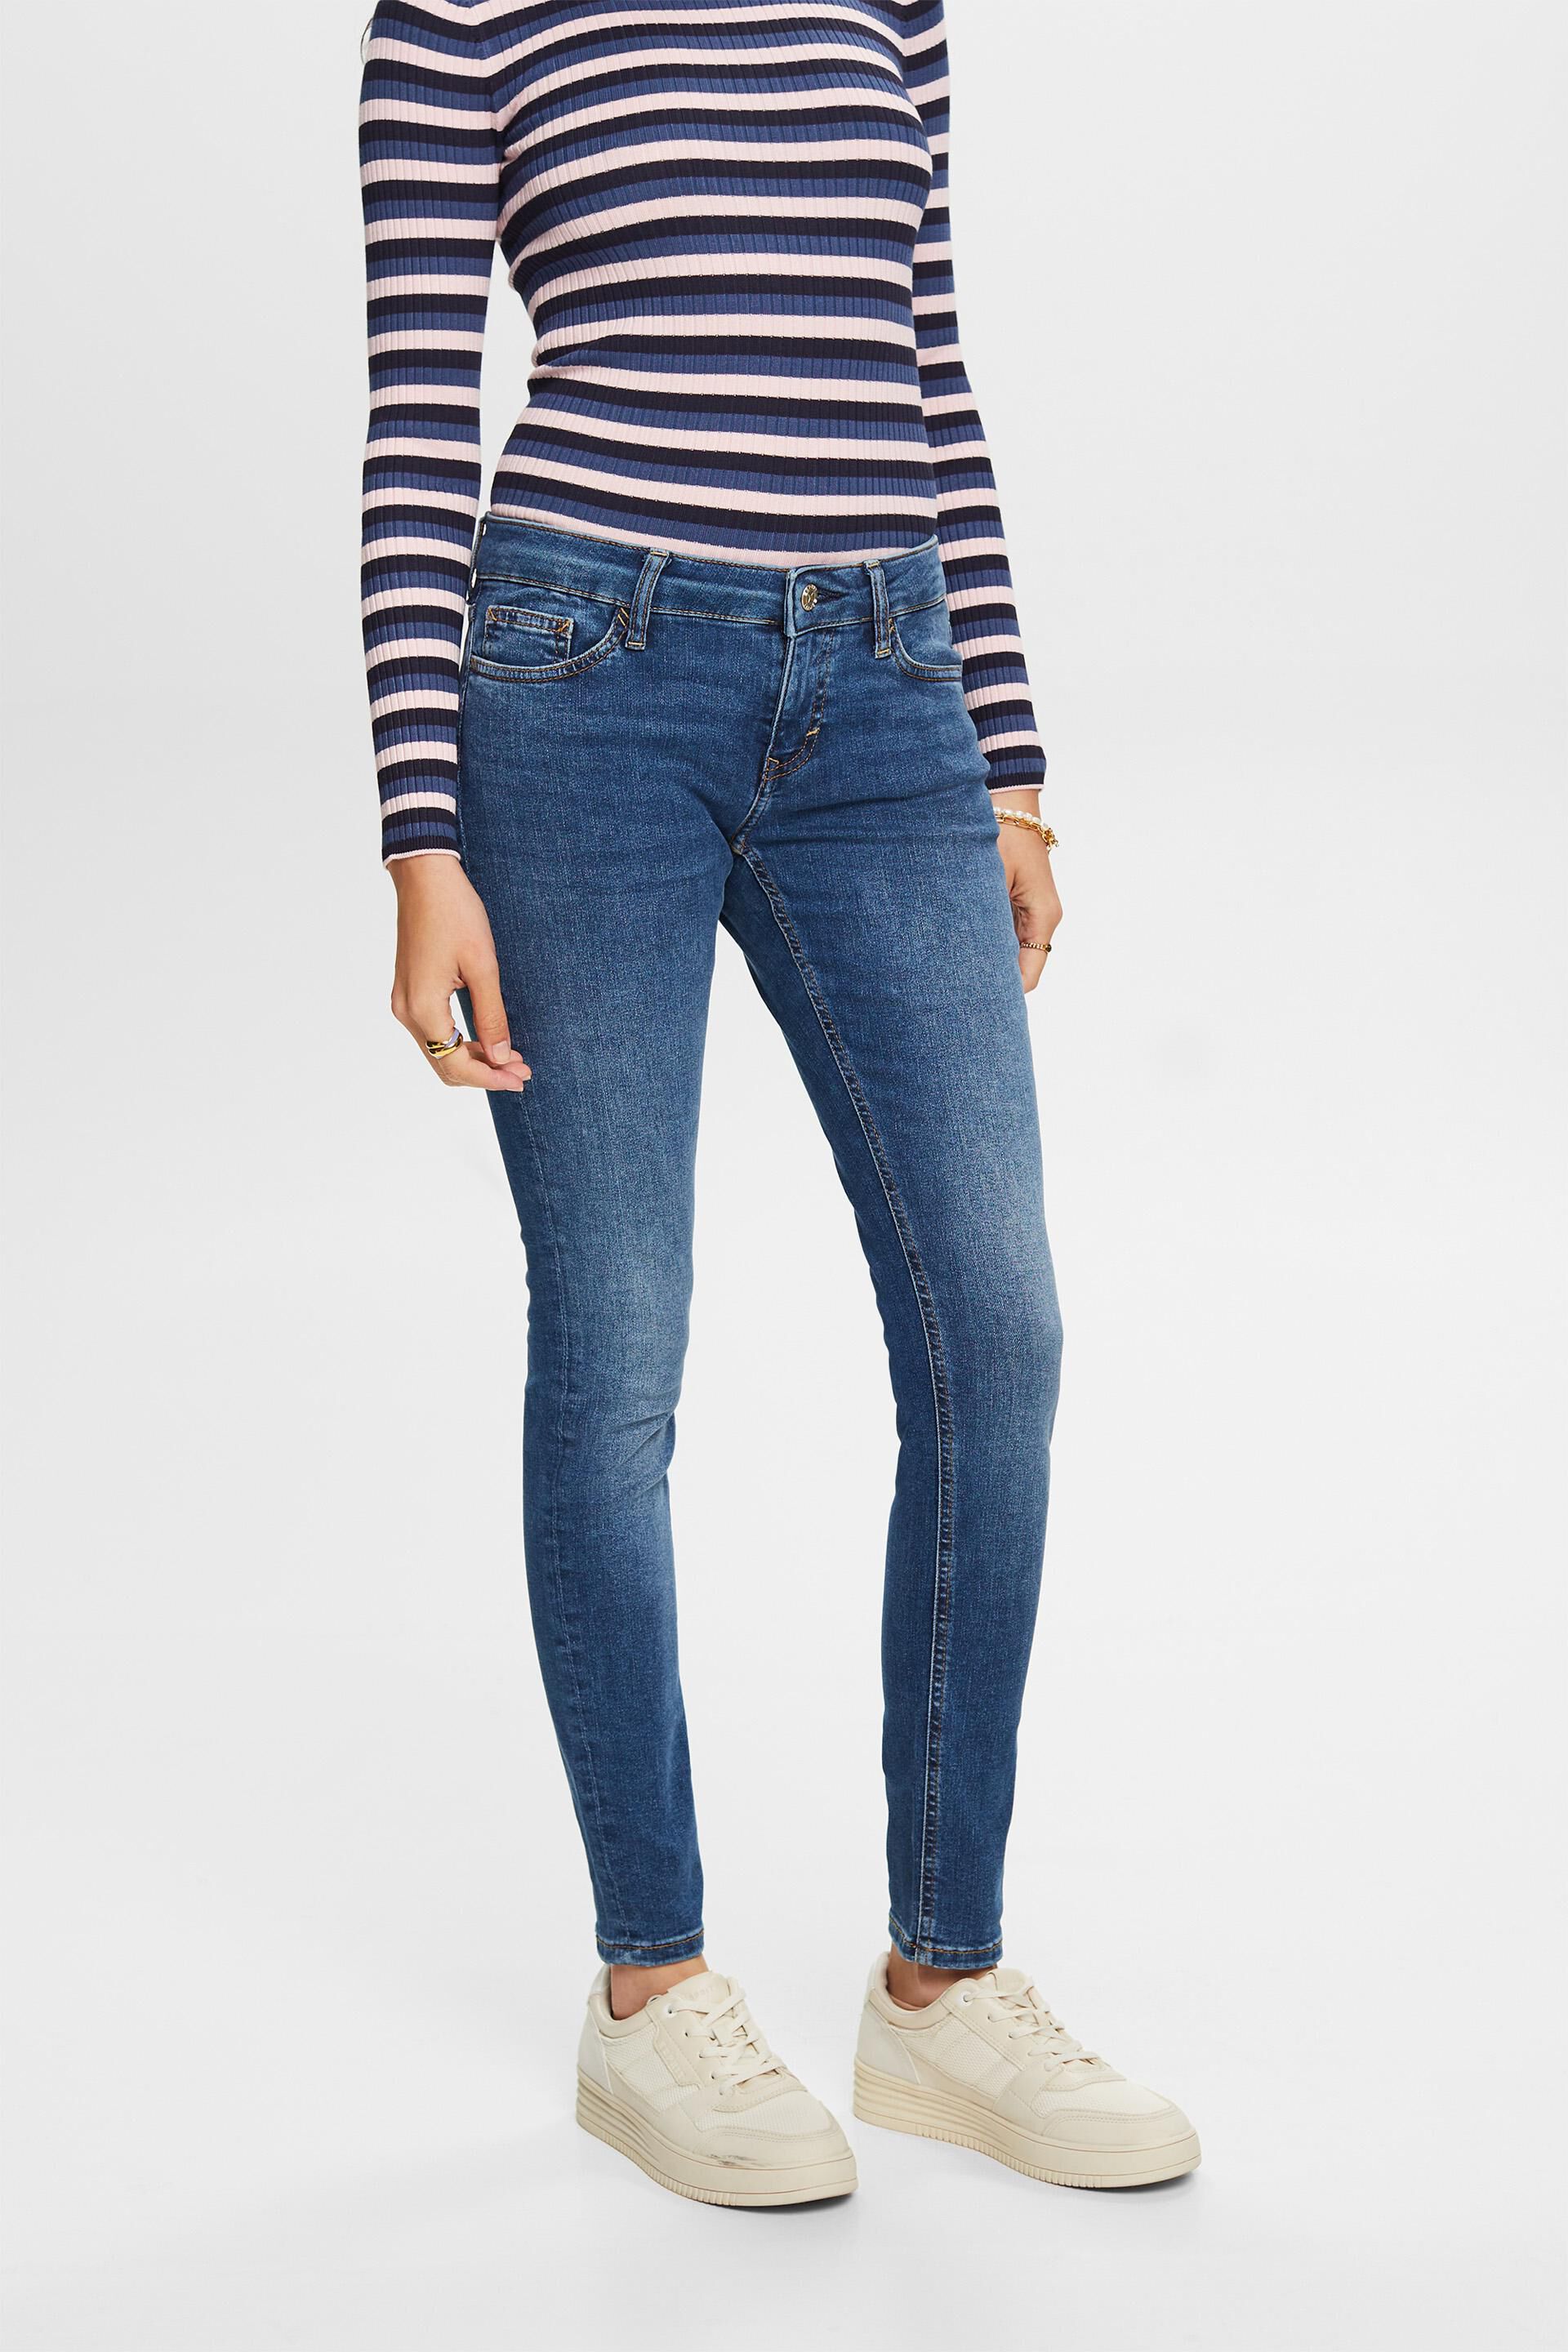 Esprit jeans skinny Recycled: low-rise